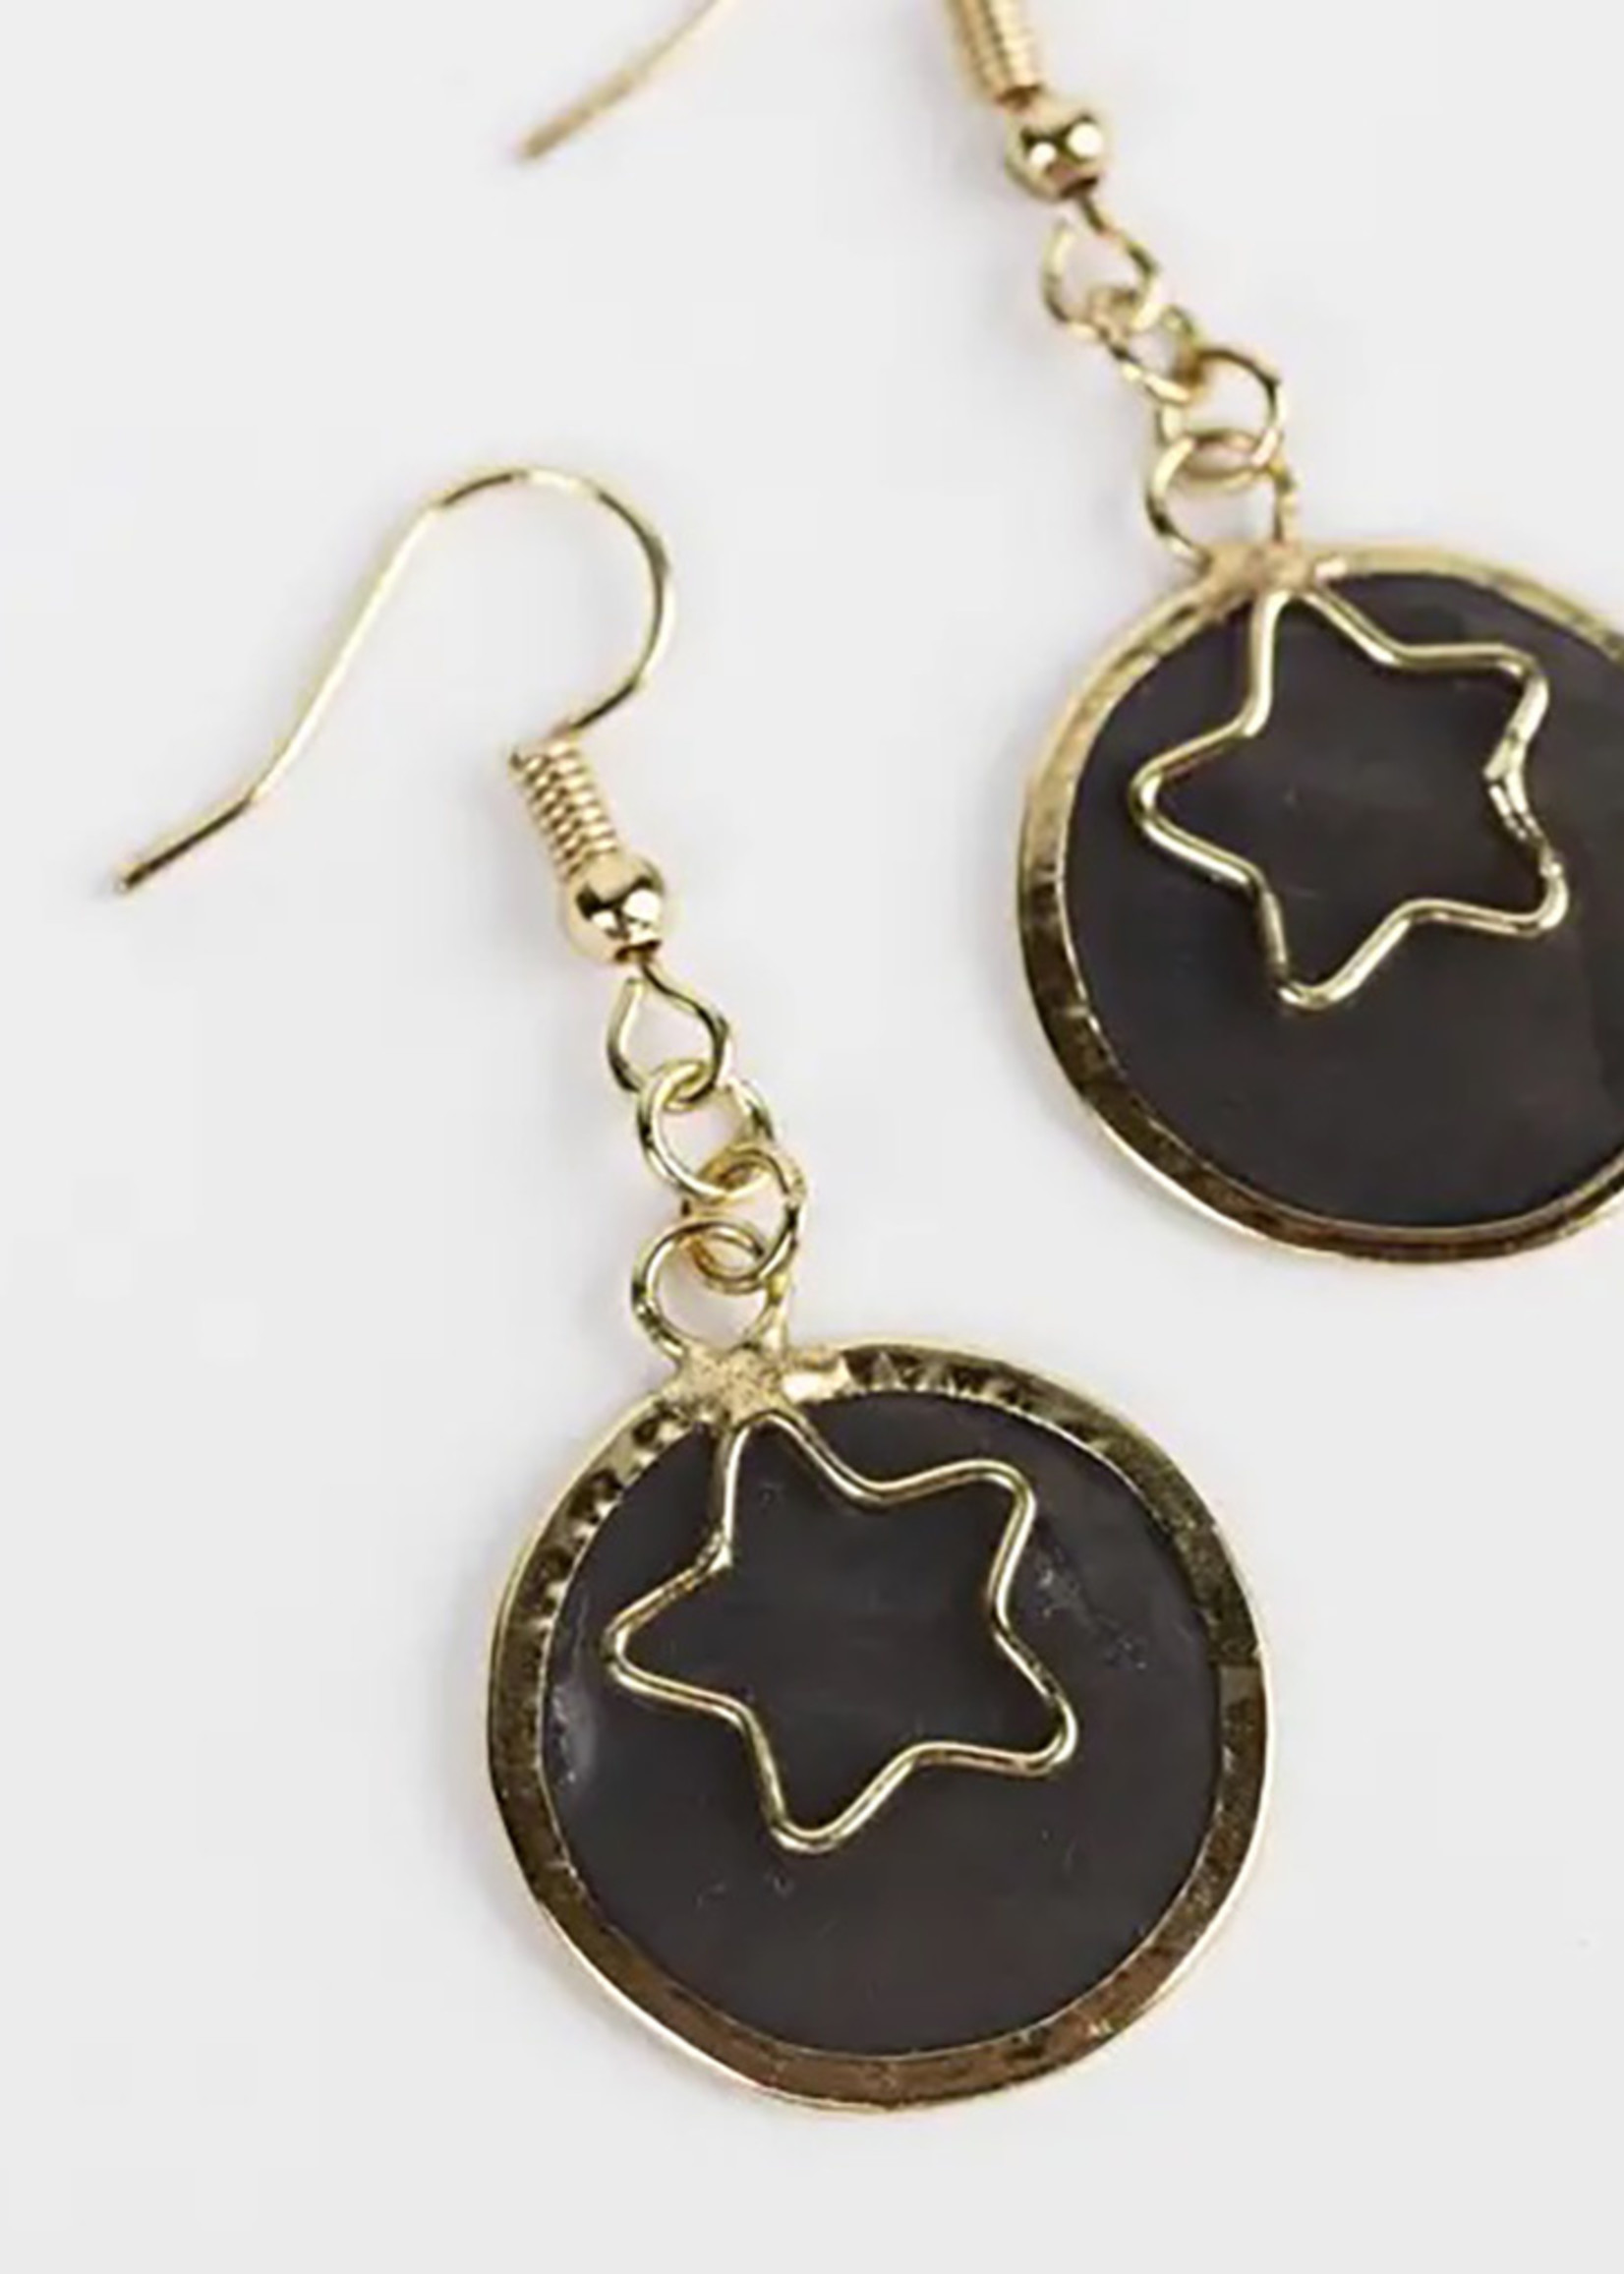 Ten Thousand Villages North Star Earrings